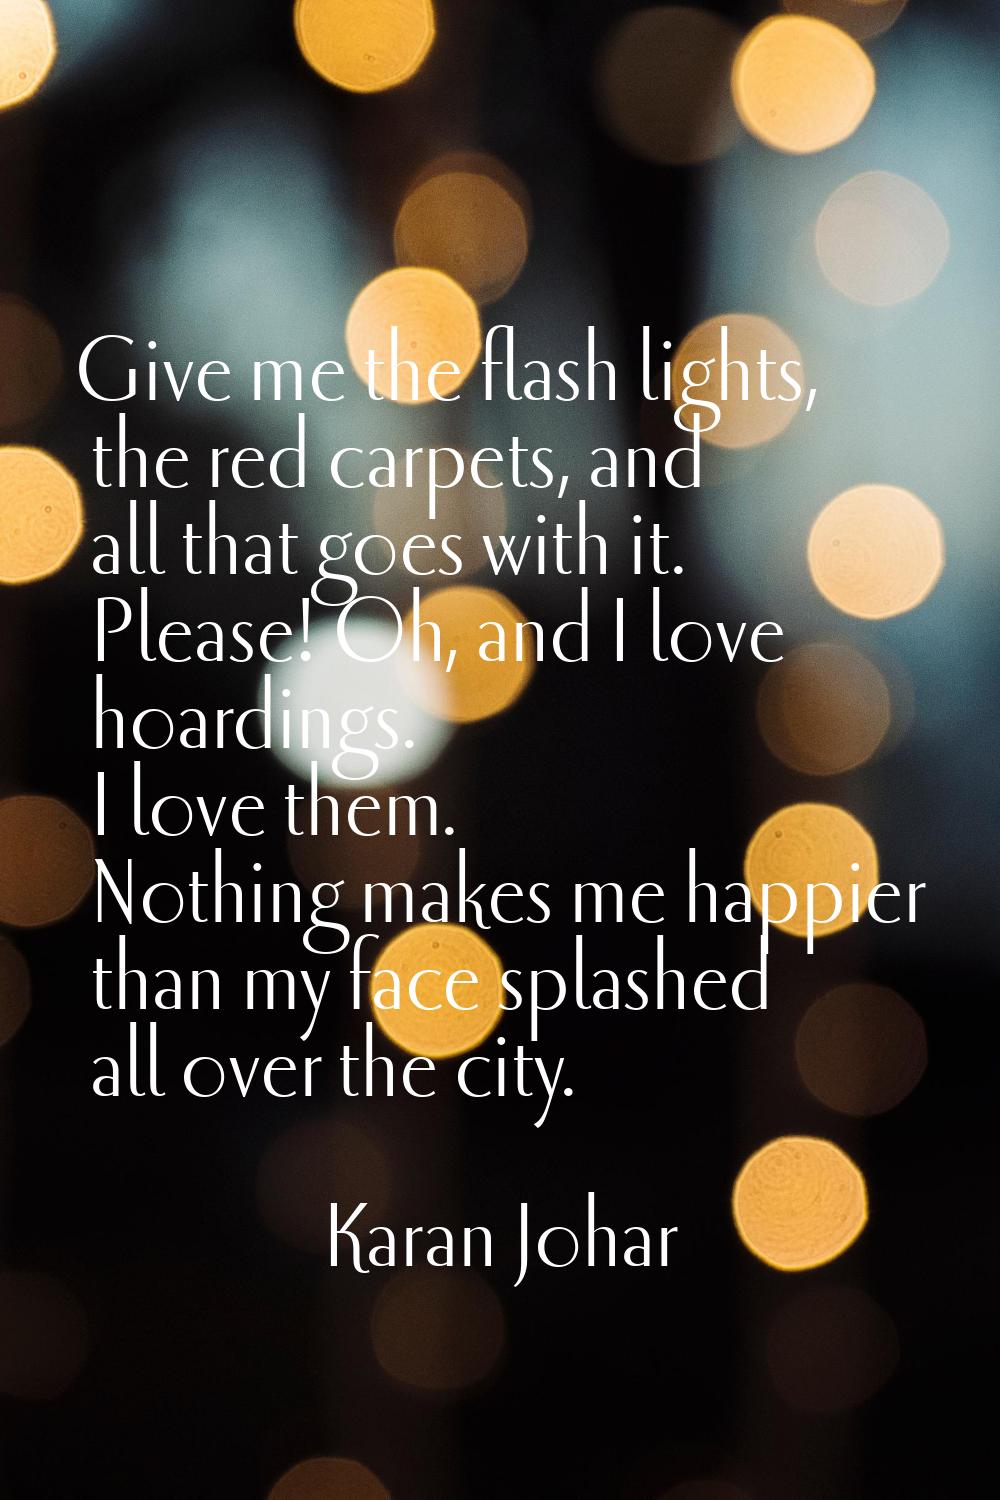 Give me the flash lights, the red carpets, and all that goes with it. Please! Oh, and I love hoardi